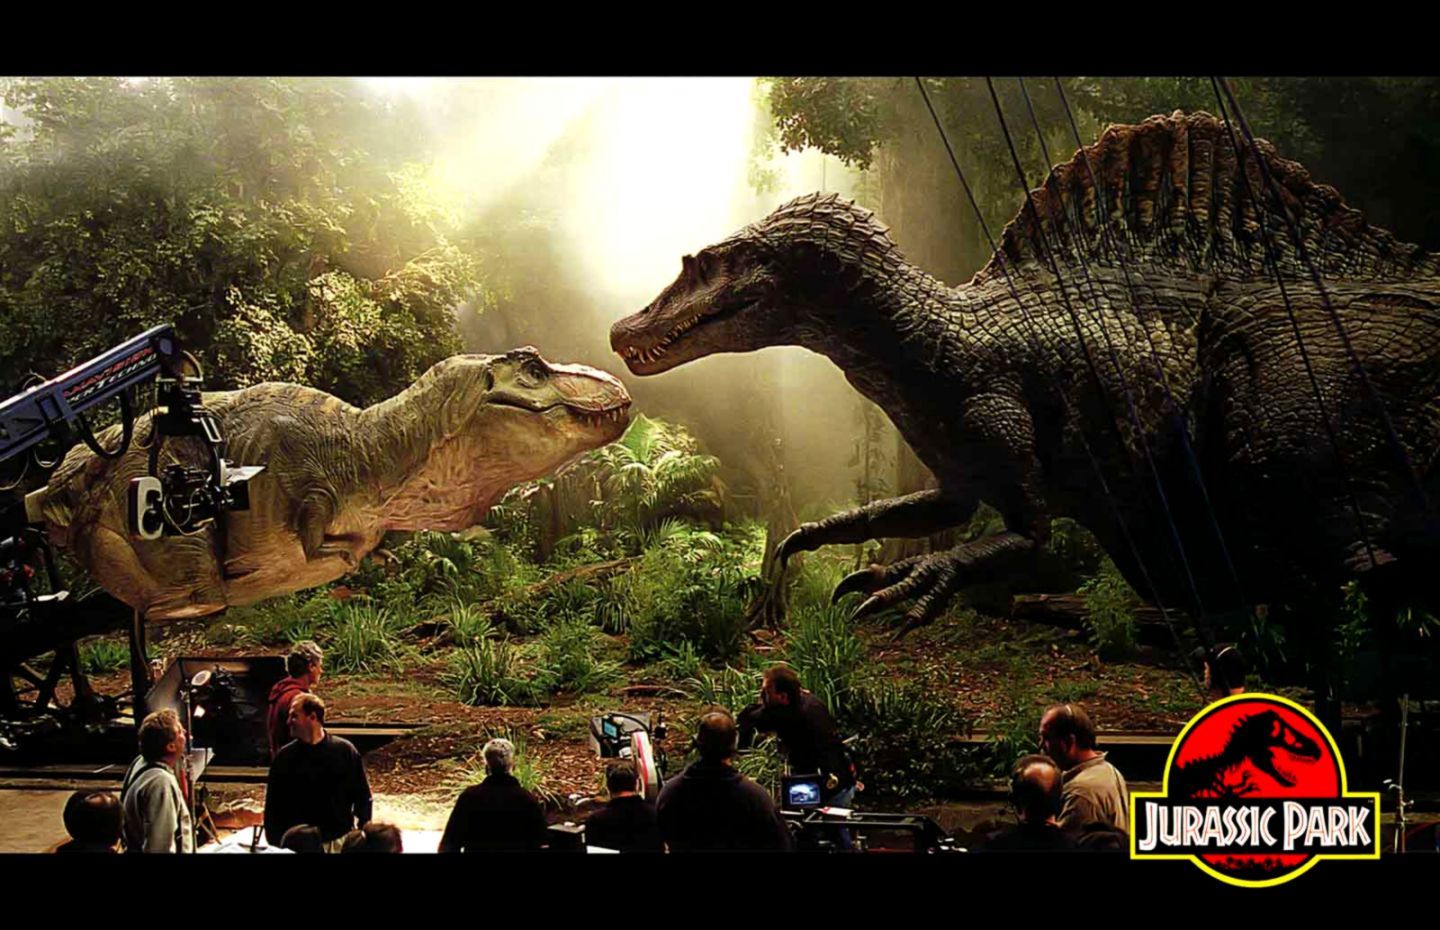 Jurassic World's Dinos are CoolBut Not Very Accurate. Blog. Museum of World Treasures